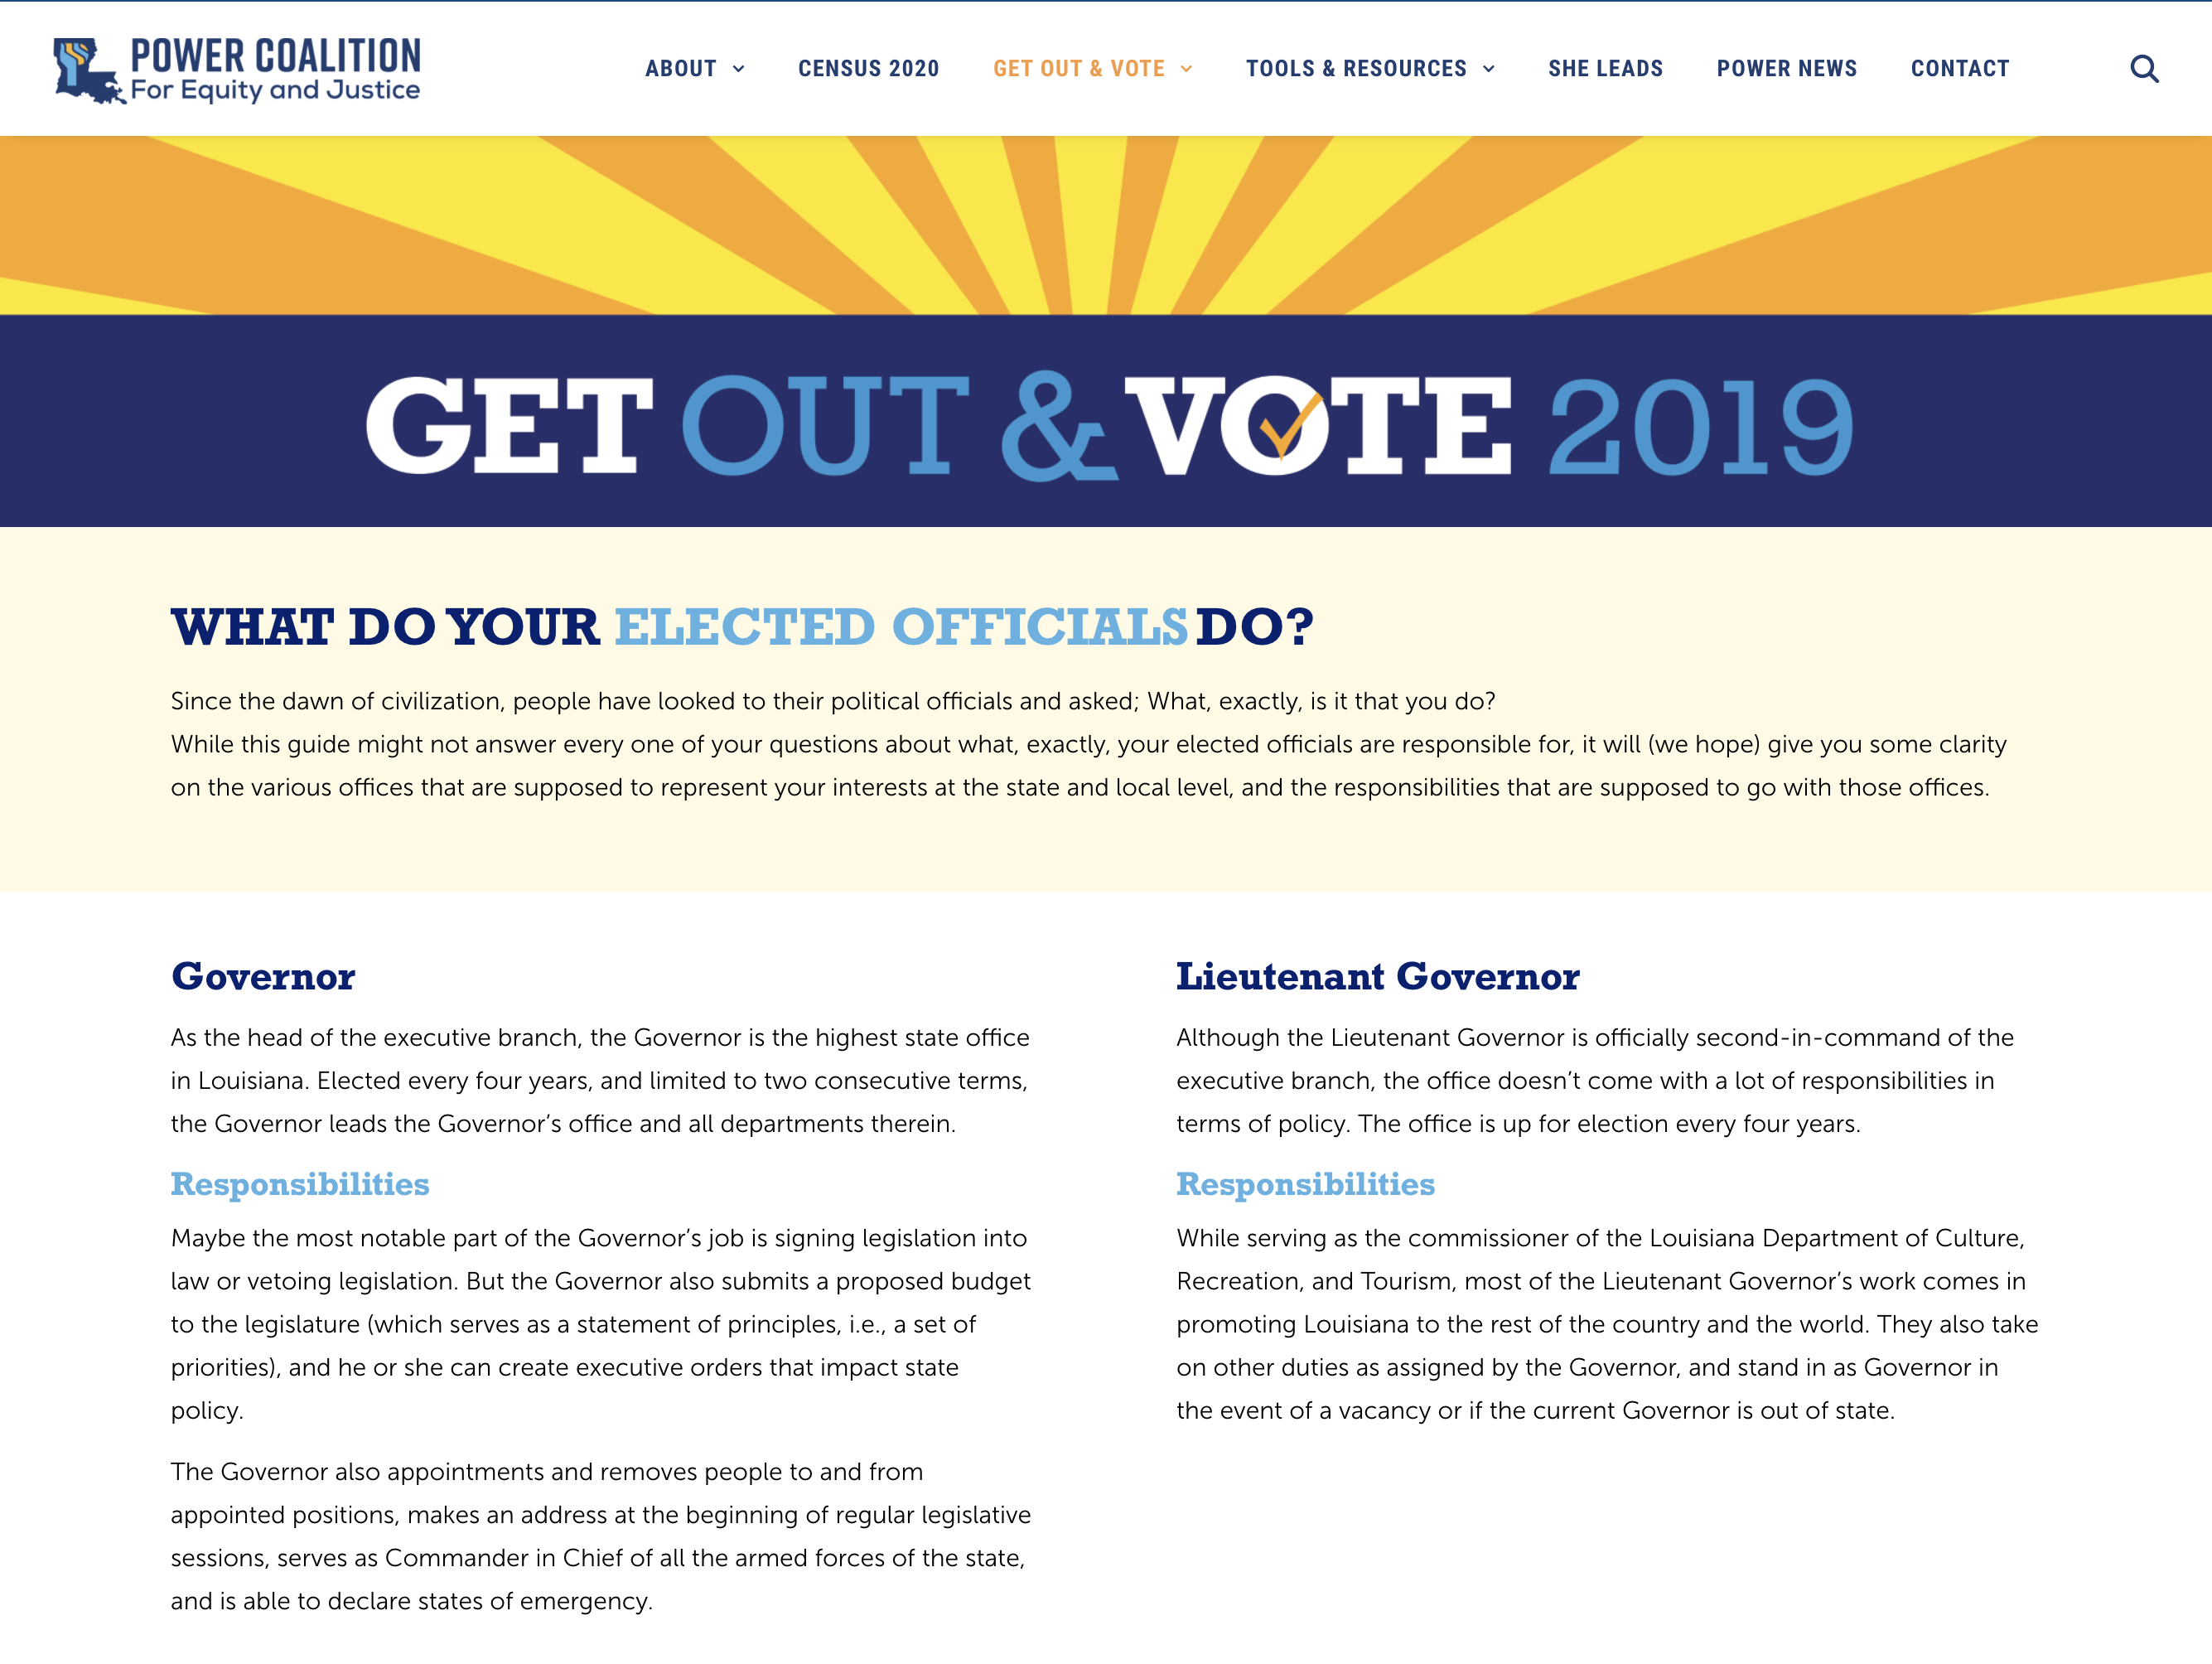 Power Coalition for Equity and Justice Adds More Voter Education Tools & Resources to Website